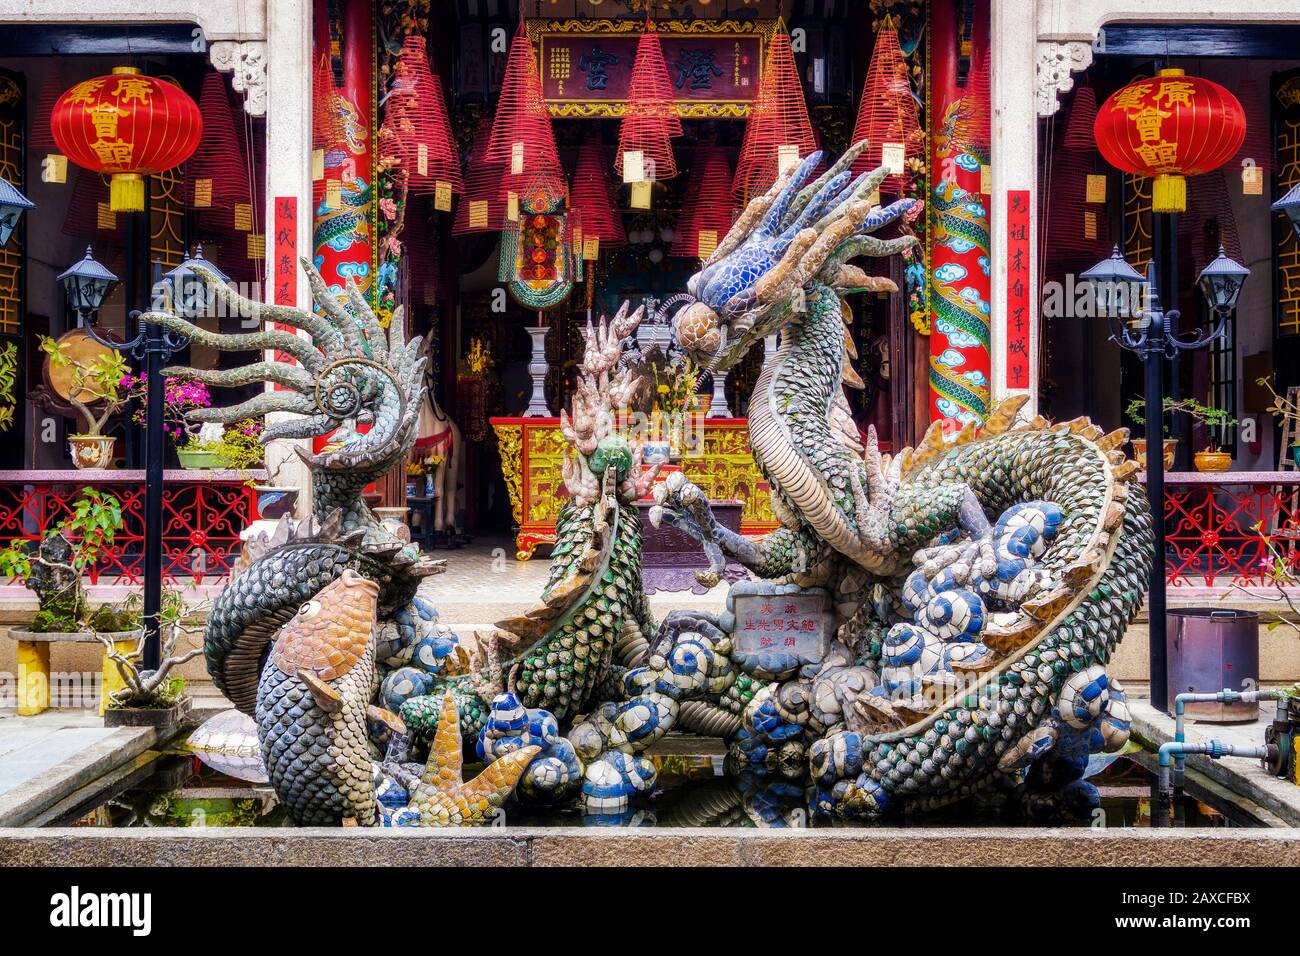 Dragon fountain at the Cantonese Assembly Hall (Quang Trieu) in Hoi An Ancient Town, Vietnam. Stock Photo